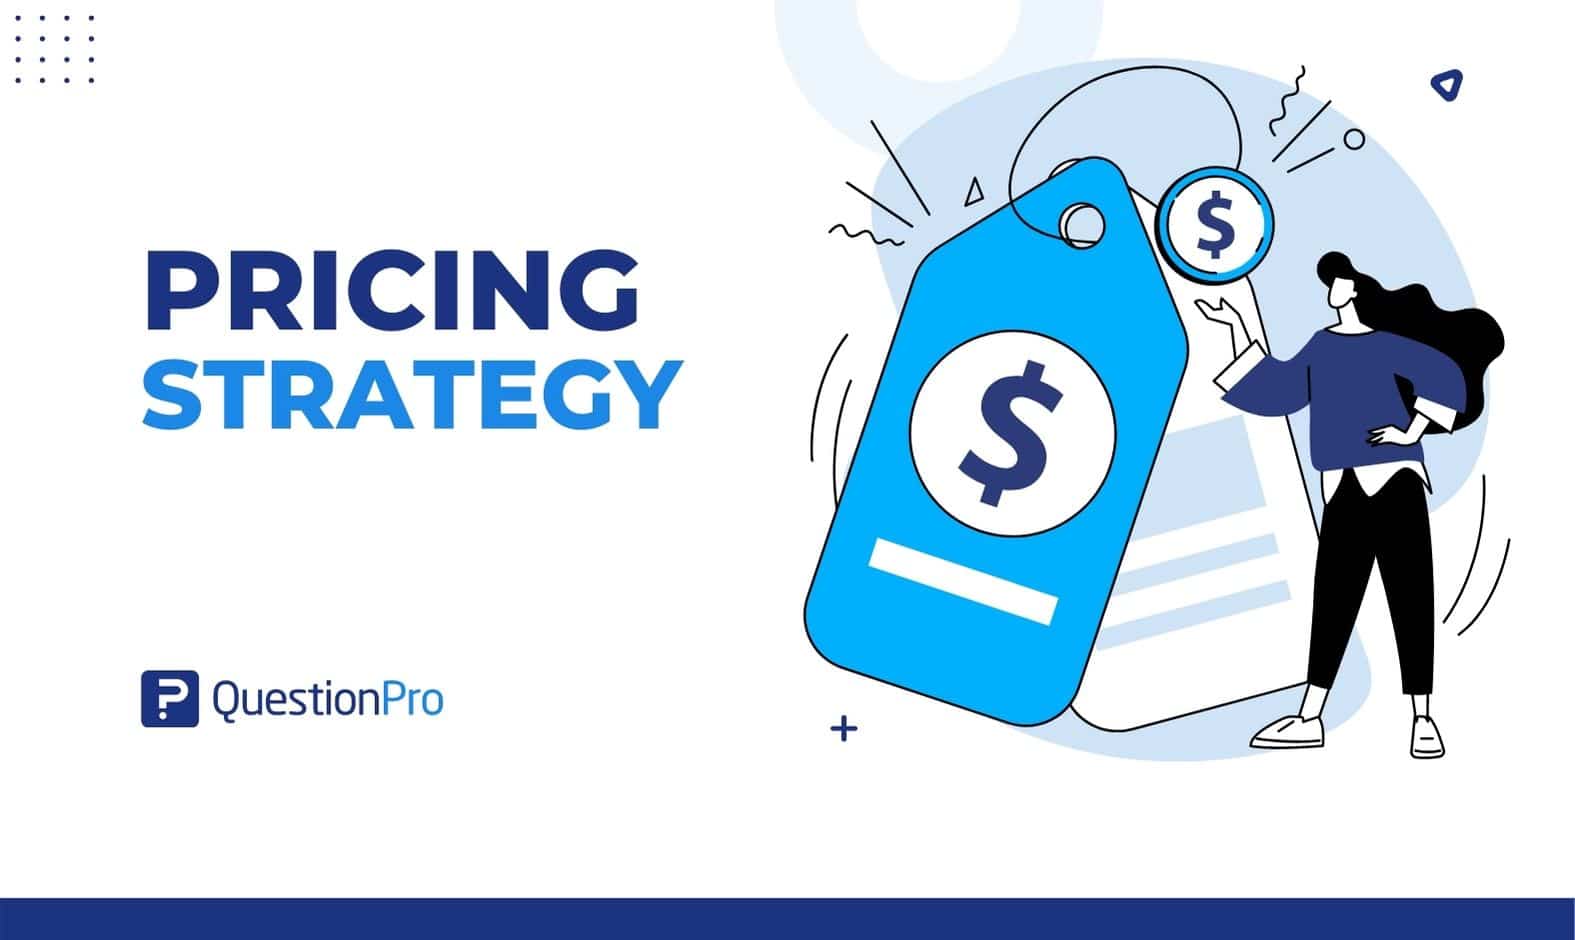 A pricing strategy can bring more customers to increase sales. Consider your business's size and offerings when deciding how to set prices.